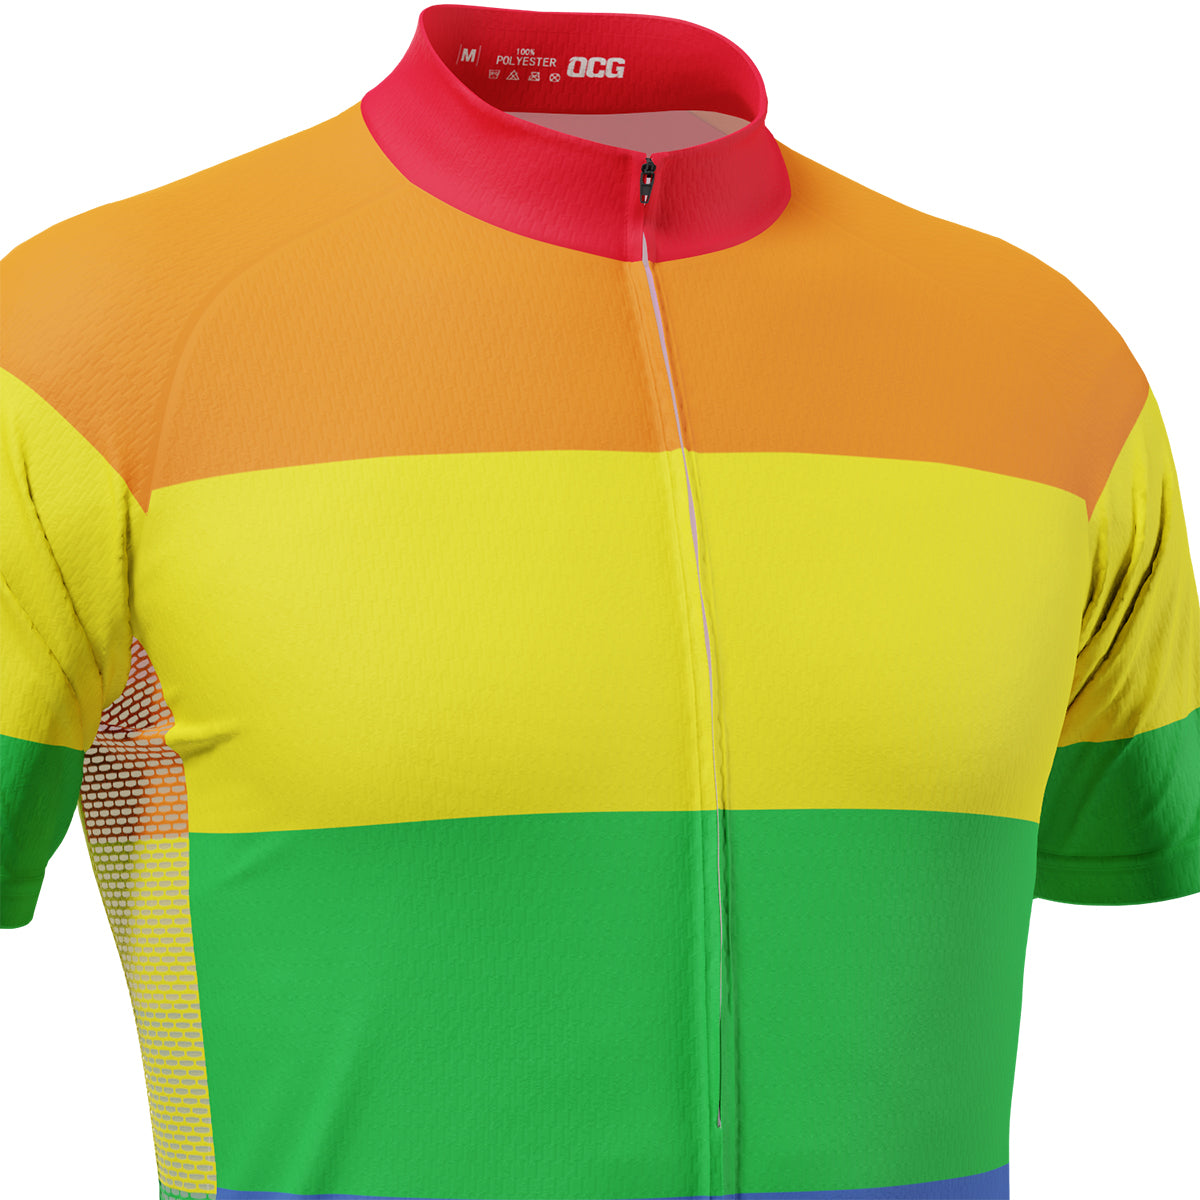 Men's LGBT Classic Gay Pride Short Sleeve Cycling Jersey